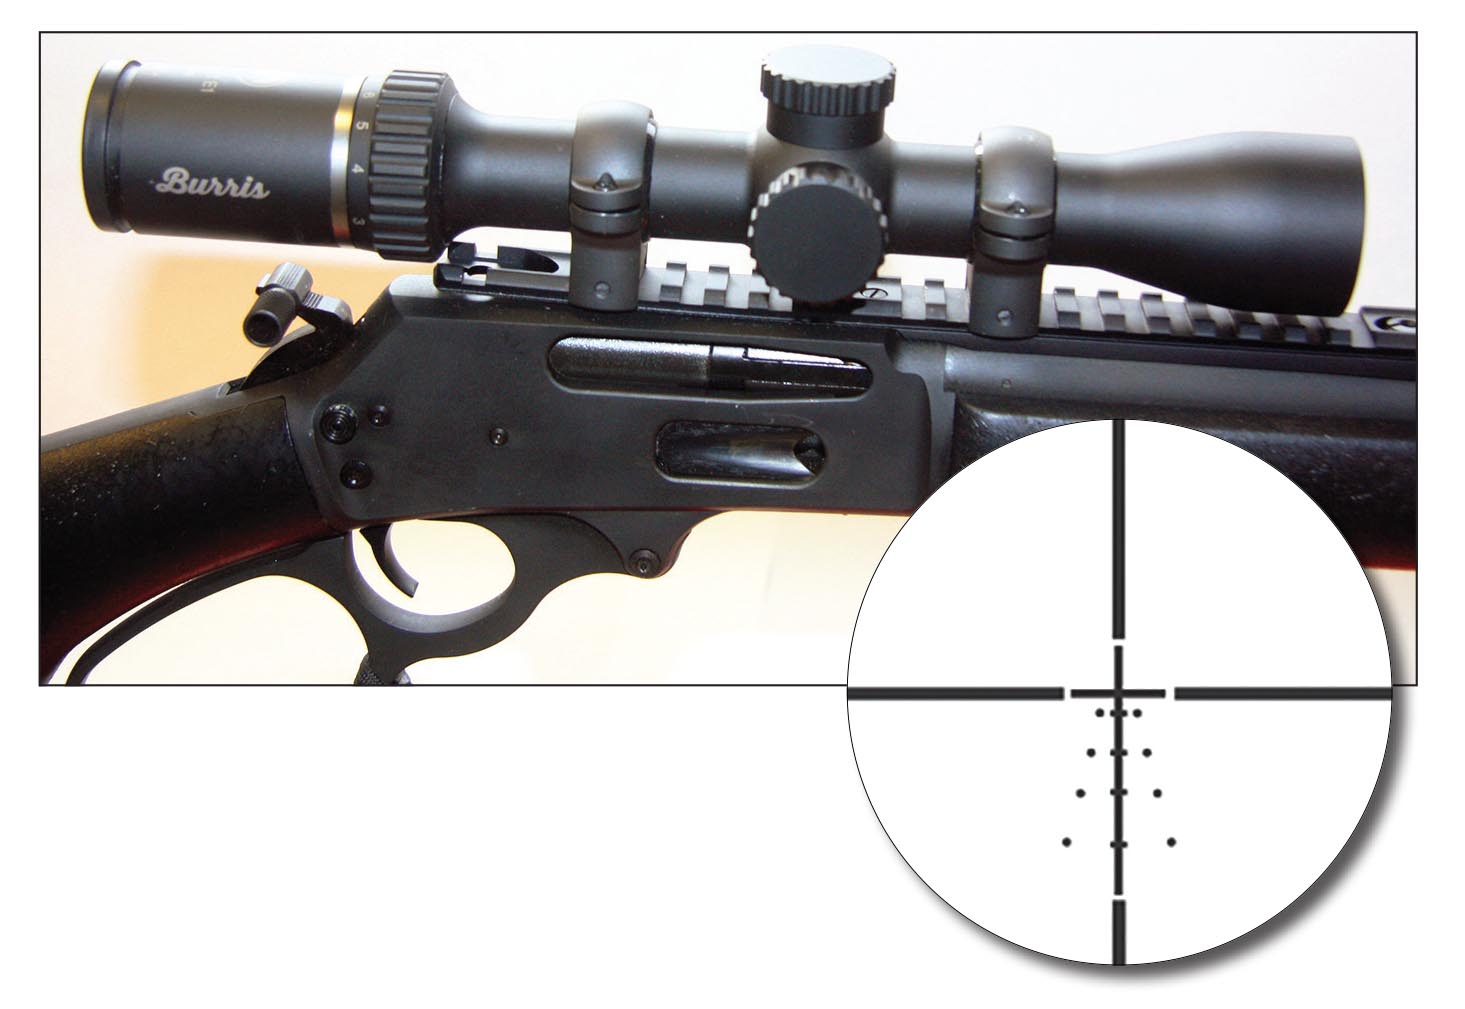 While offering an excellent scope choice for any white-tailed deer hunter no matter their rifle, the Burris Fullfield E1 2-7x 35mm offers near ideal use for any lever-action rifle.